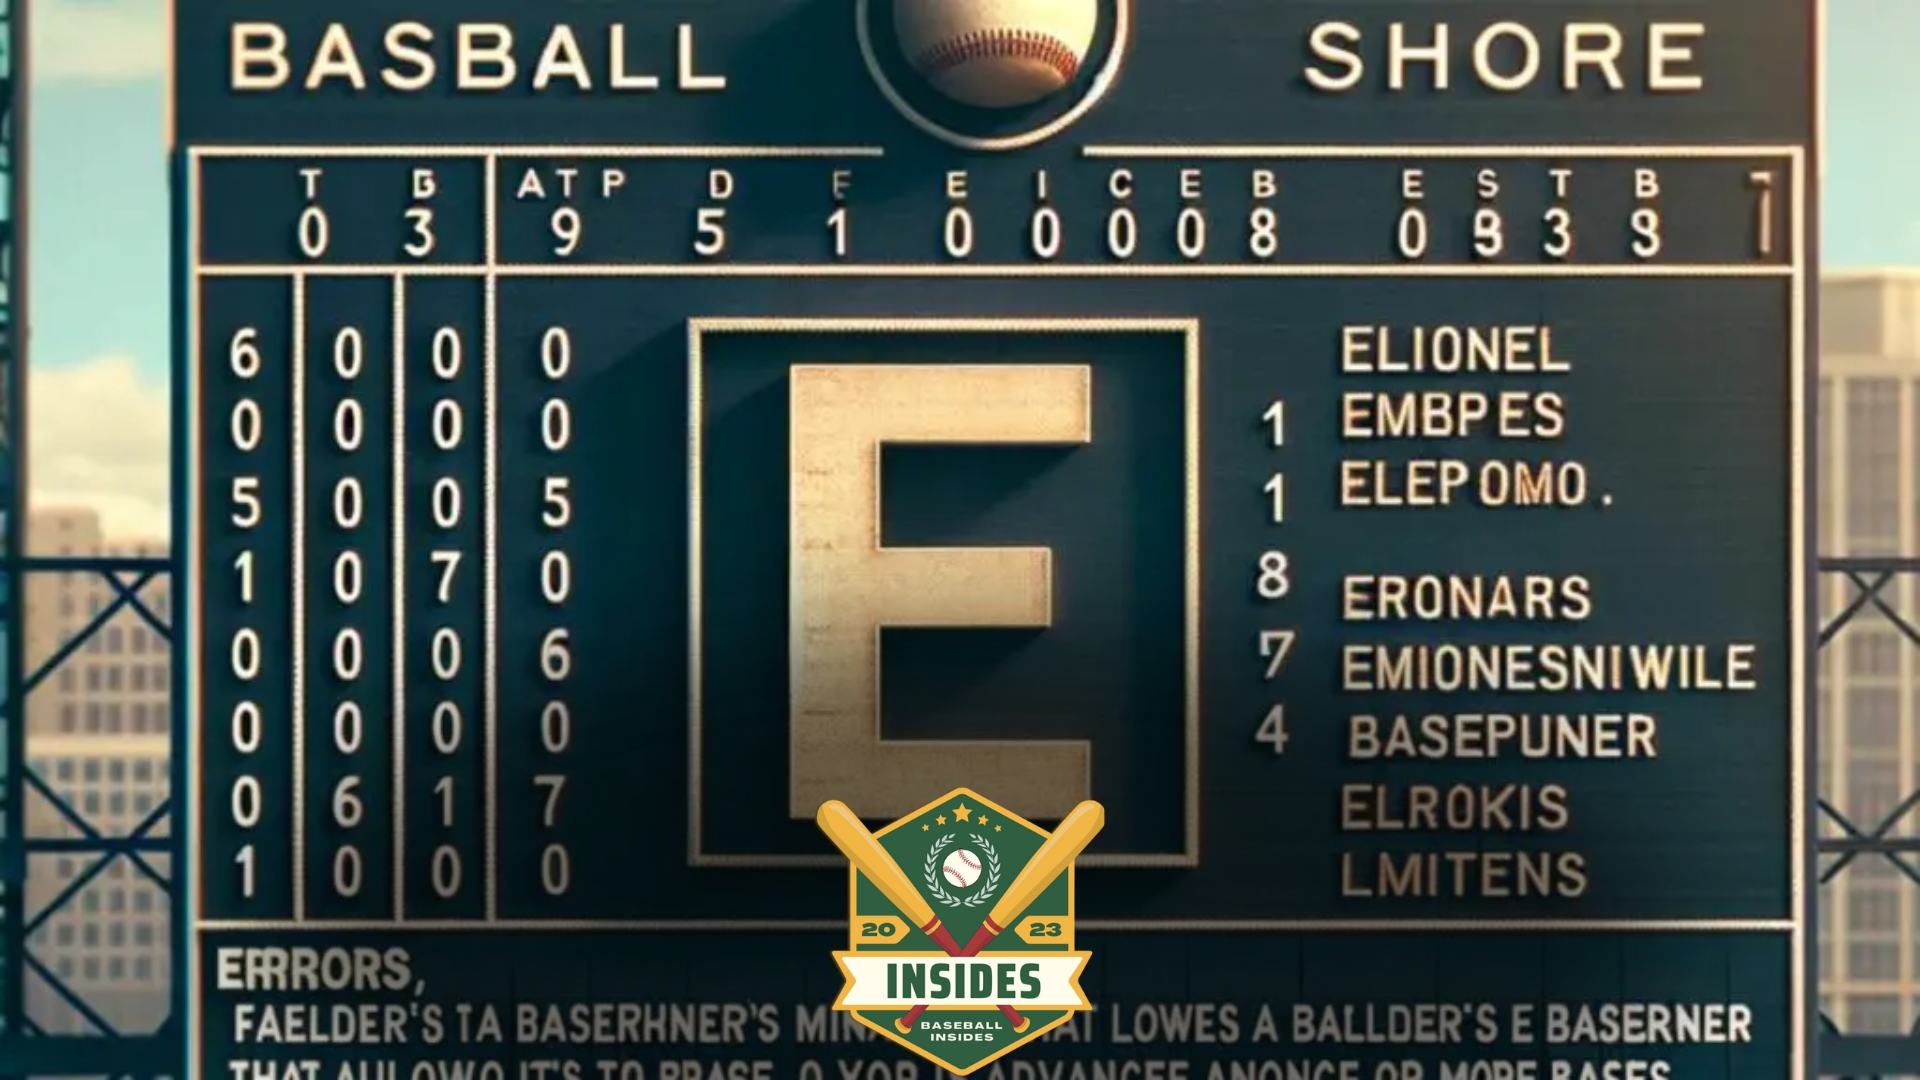 What Does E Mean in Baseball